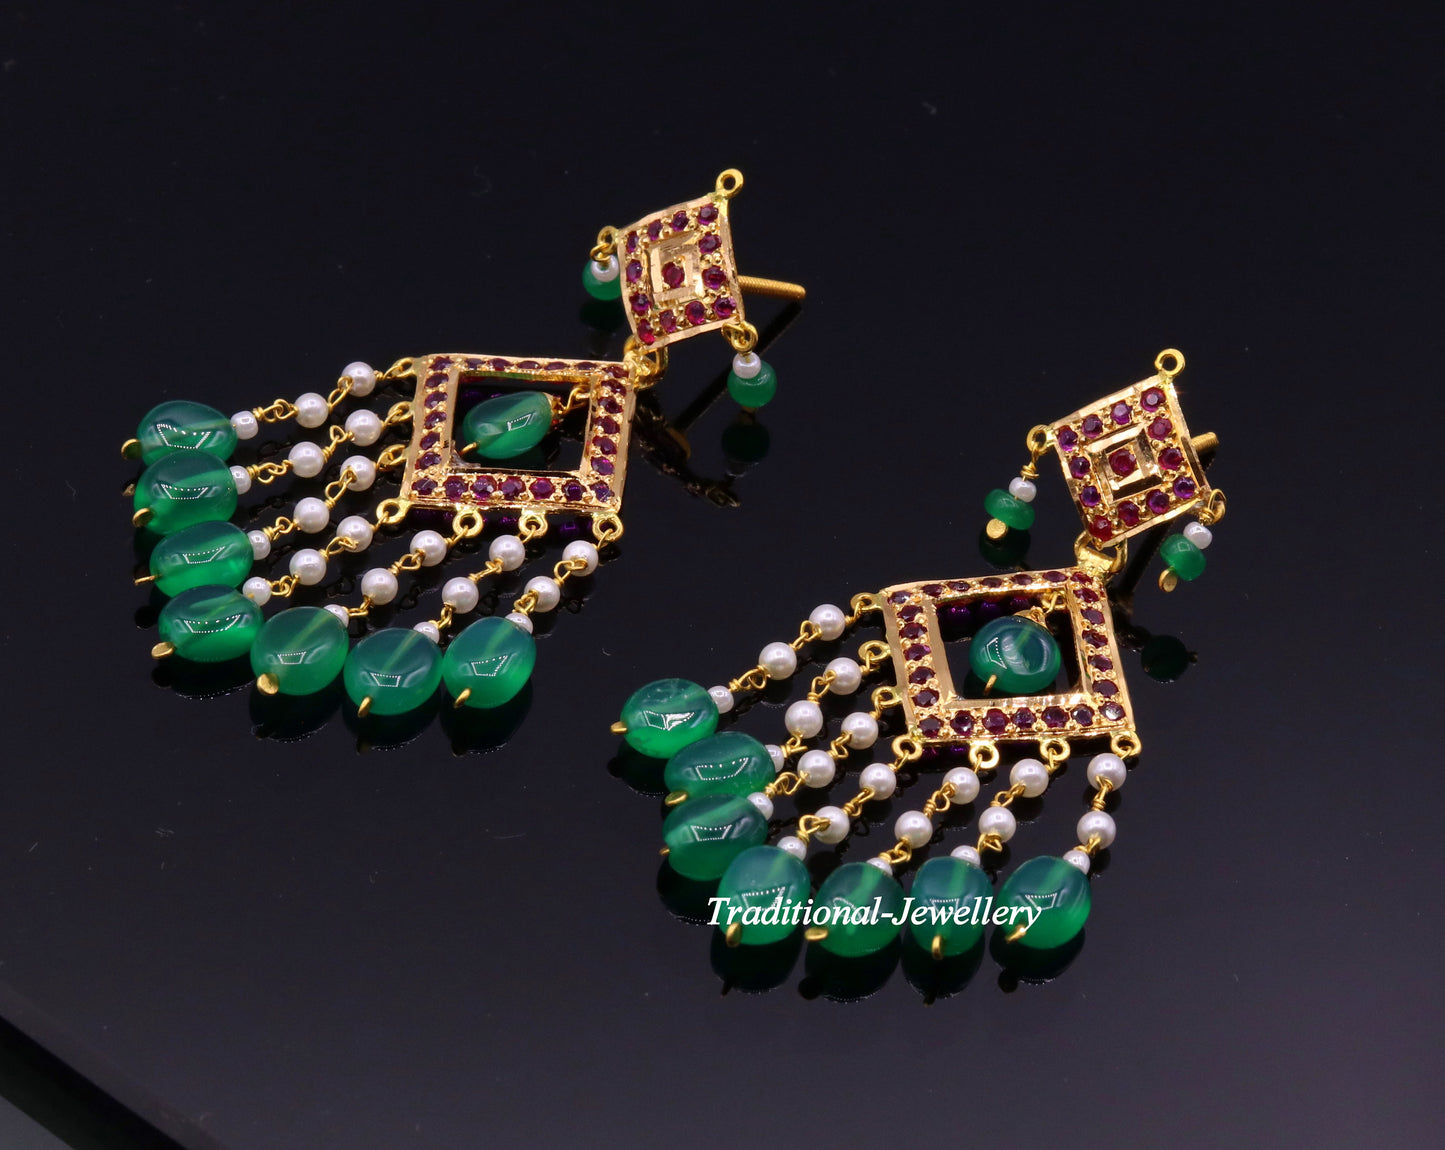 Authentic 22kt yellow gold handmade jadau earring dangling fabulous wedding anniversary gifting jewelry from rajasthan India - TRIBAL ORNAMENTS